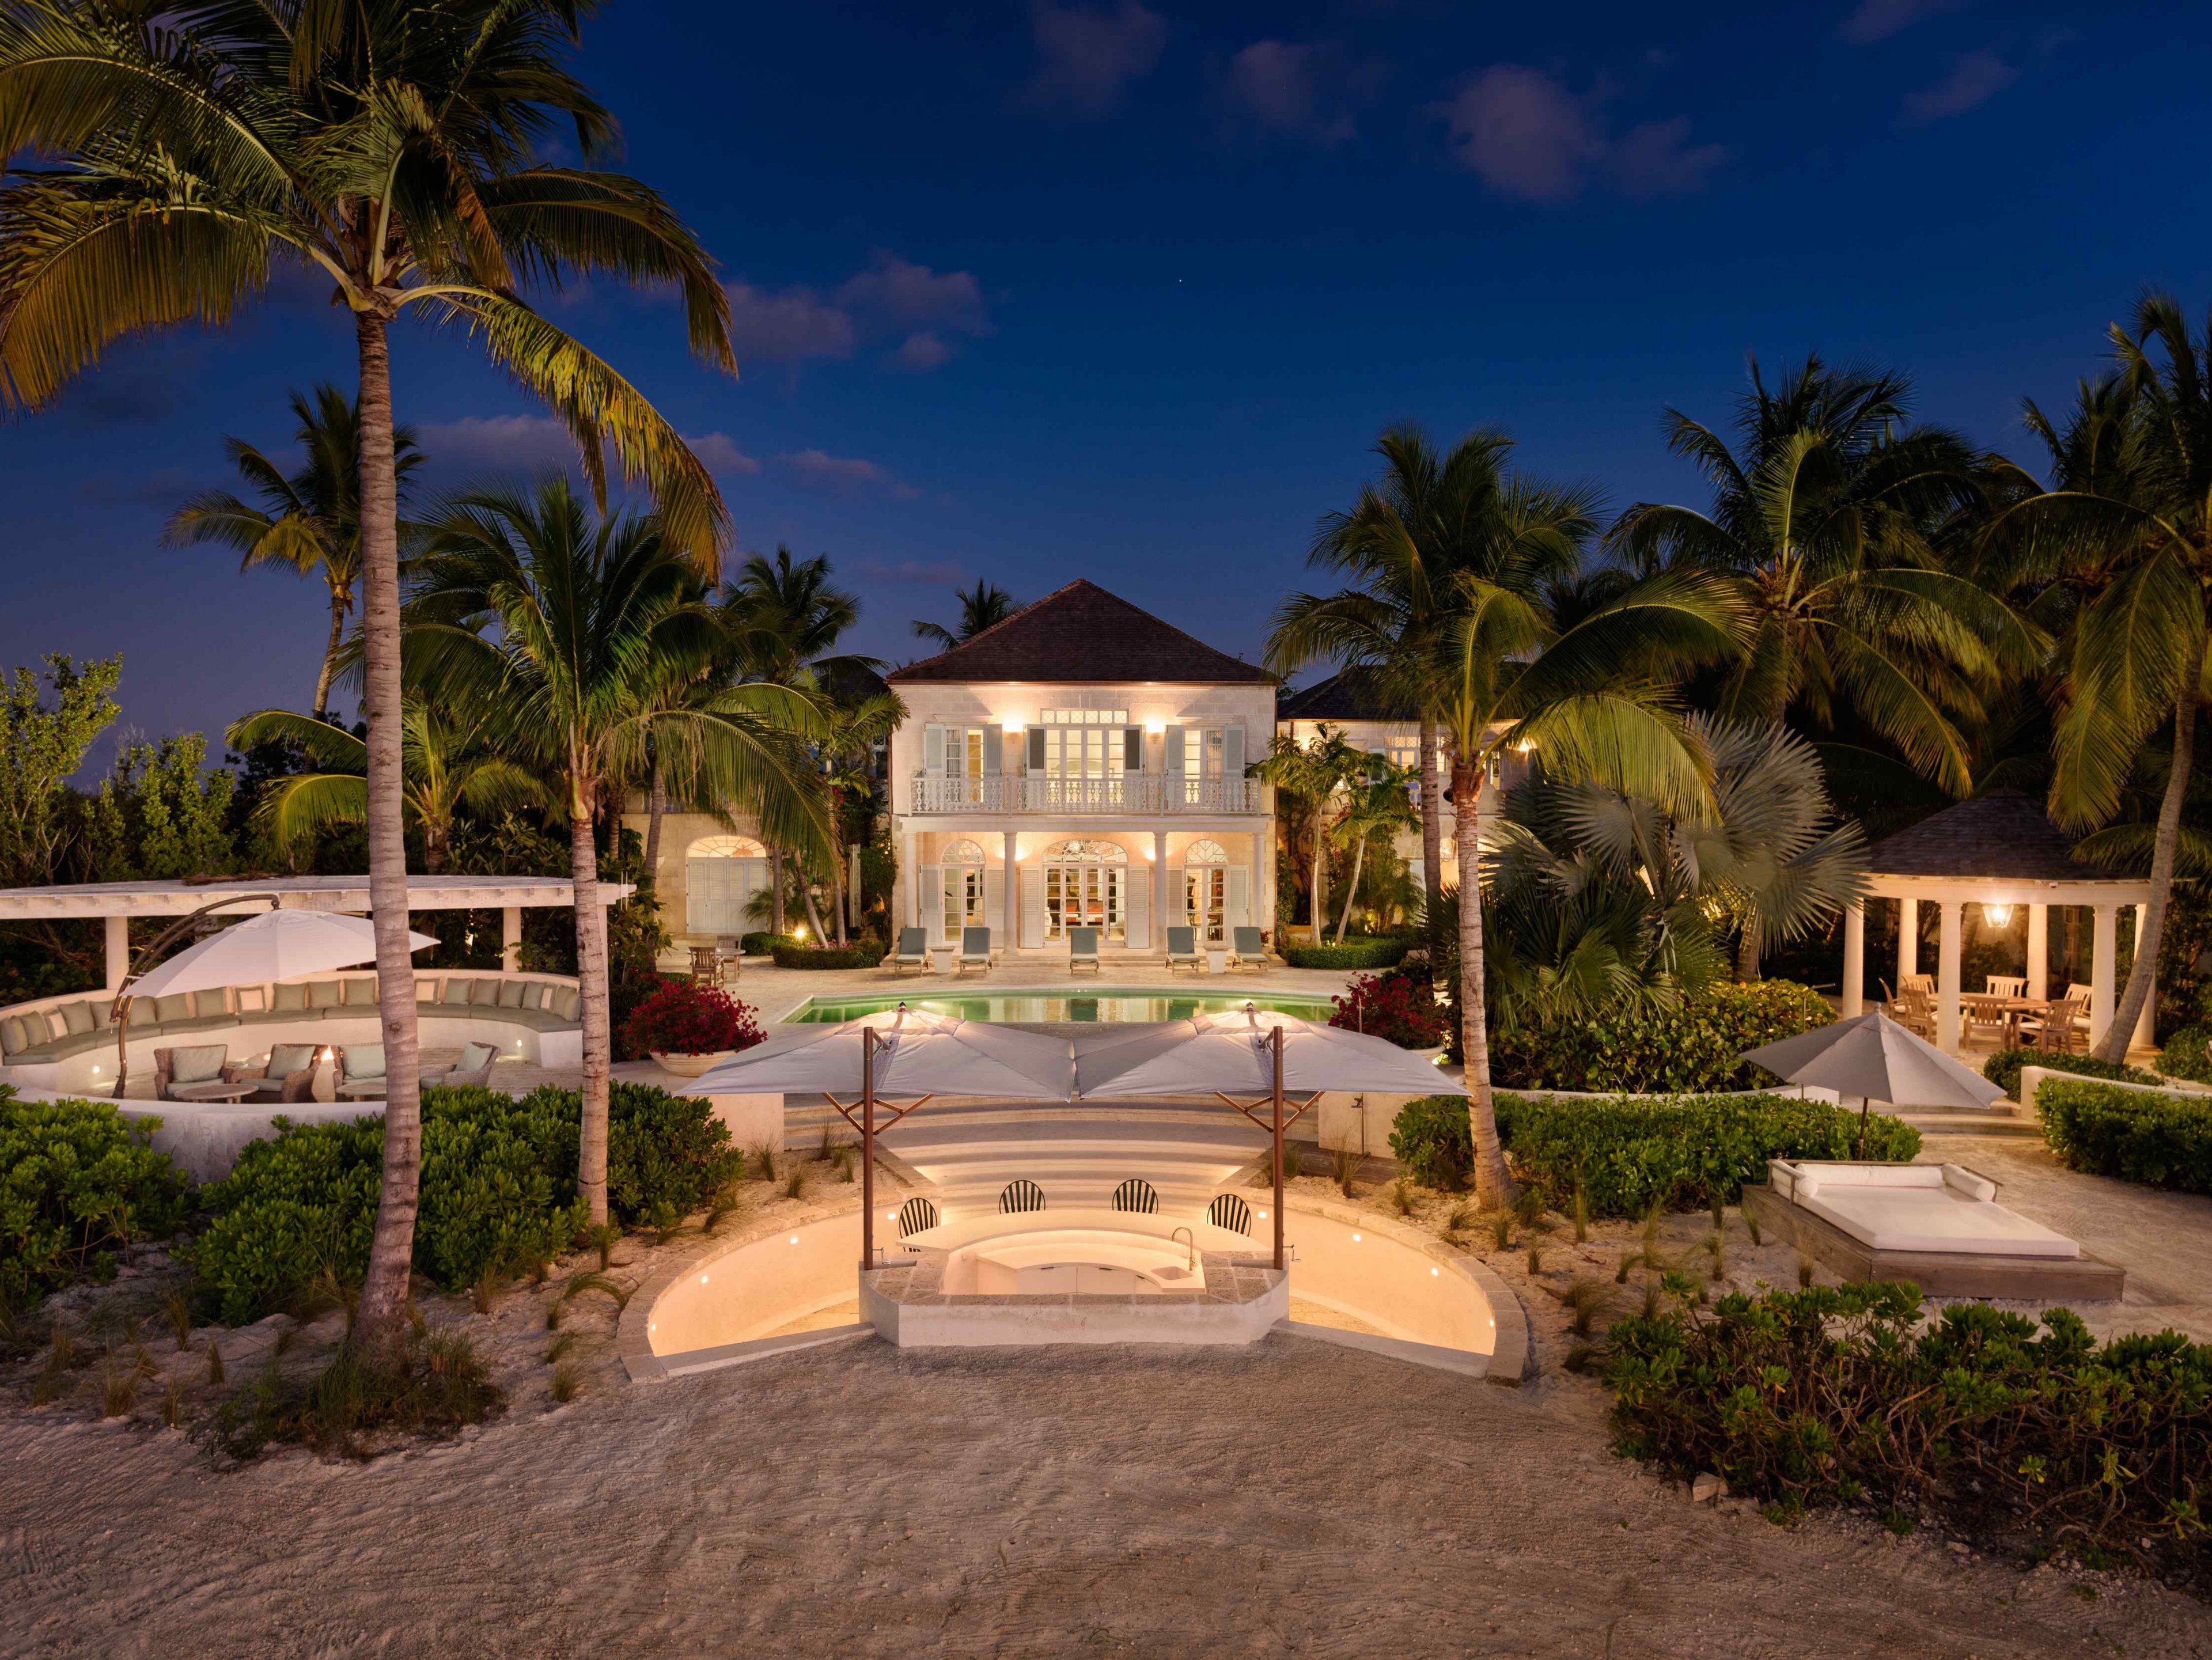 Coral House is one of the best places to stay in Turks and Caicos